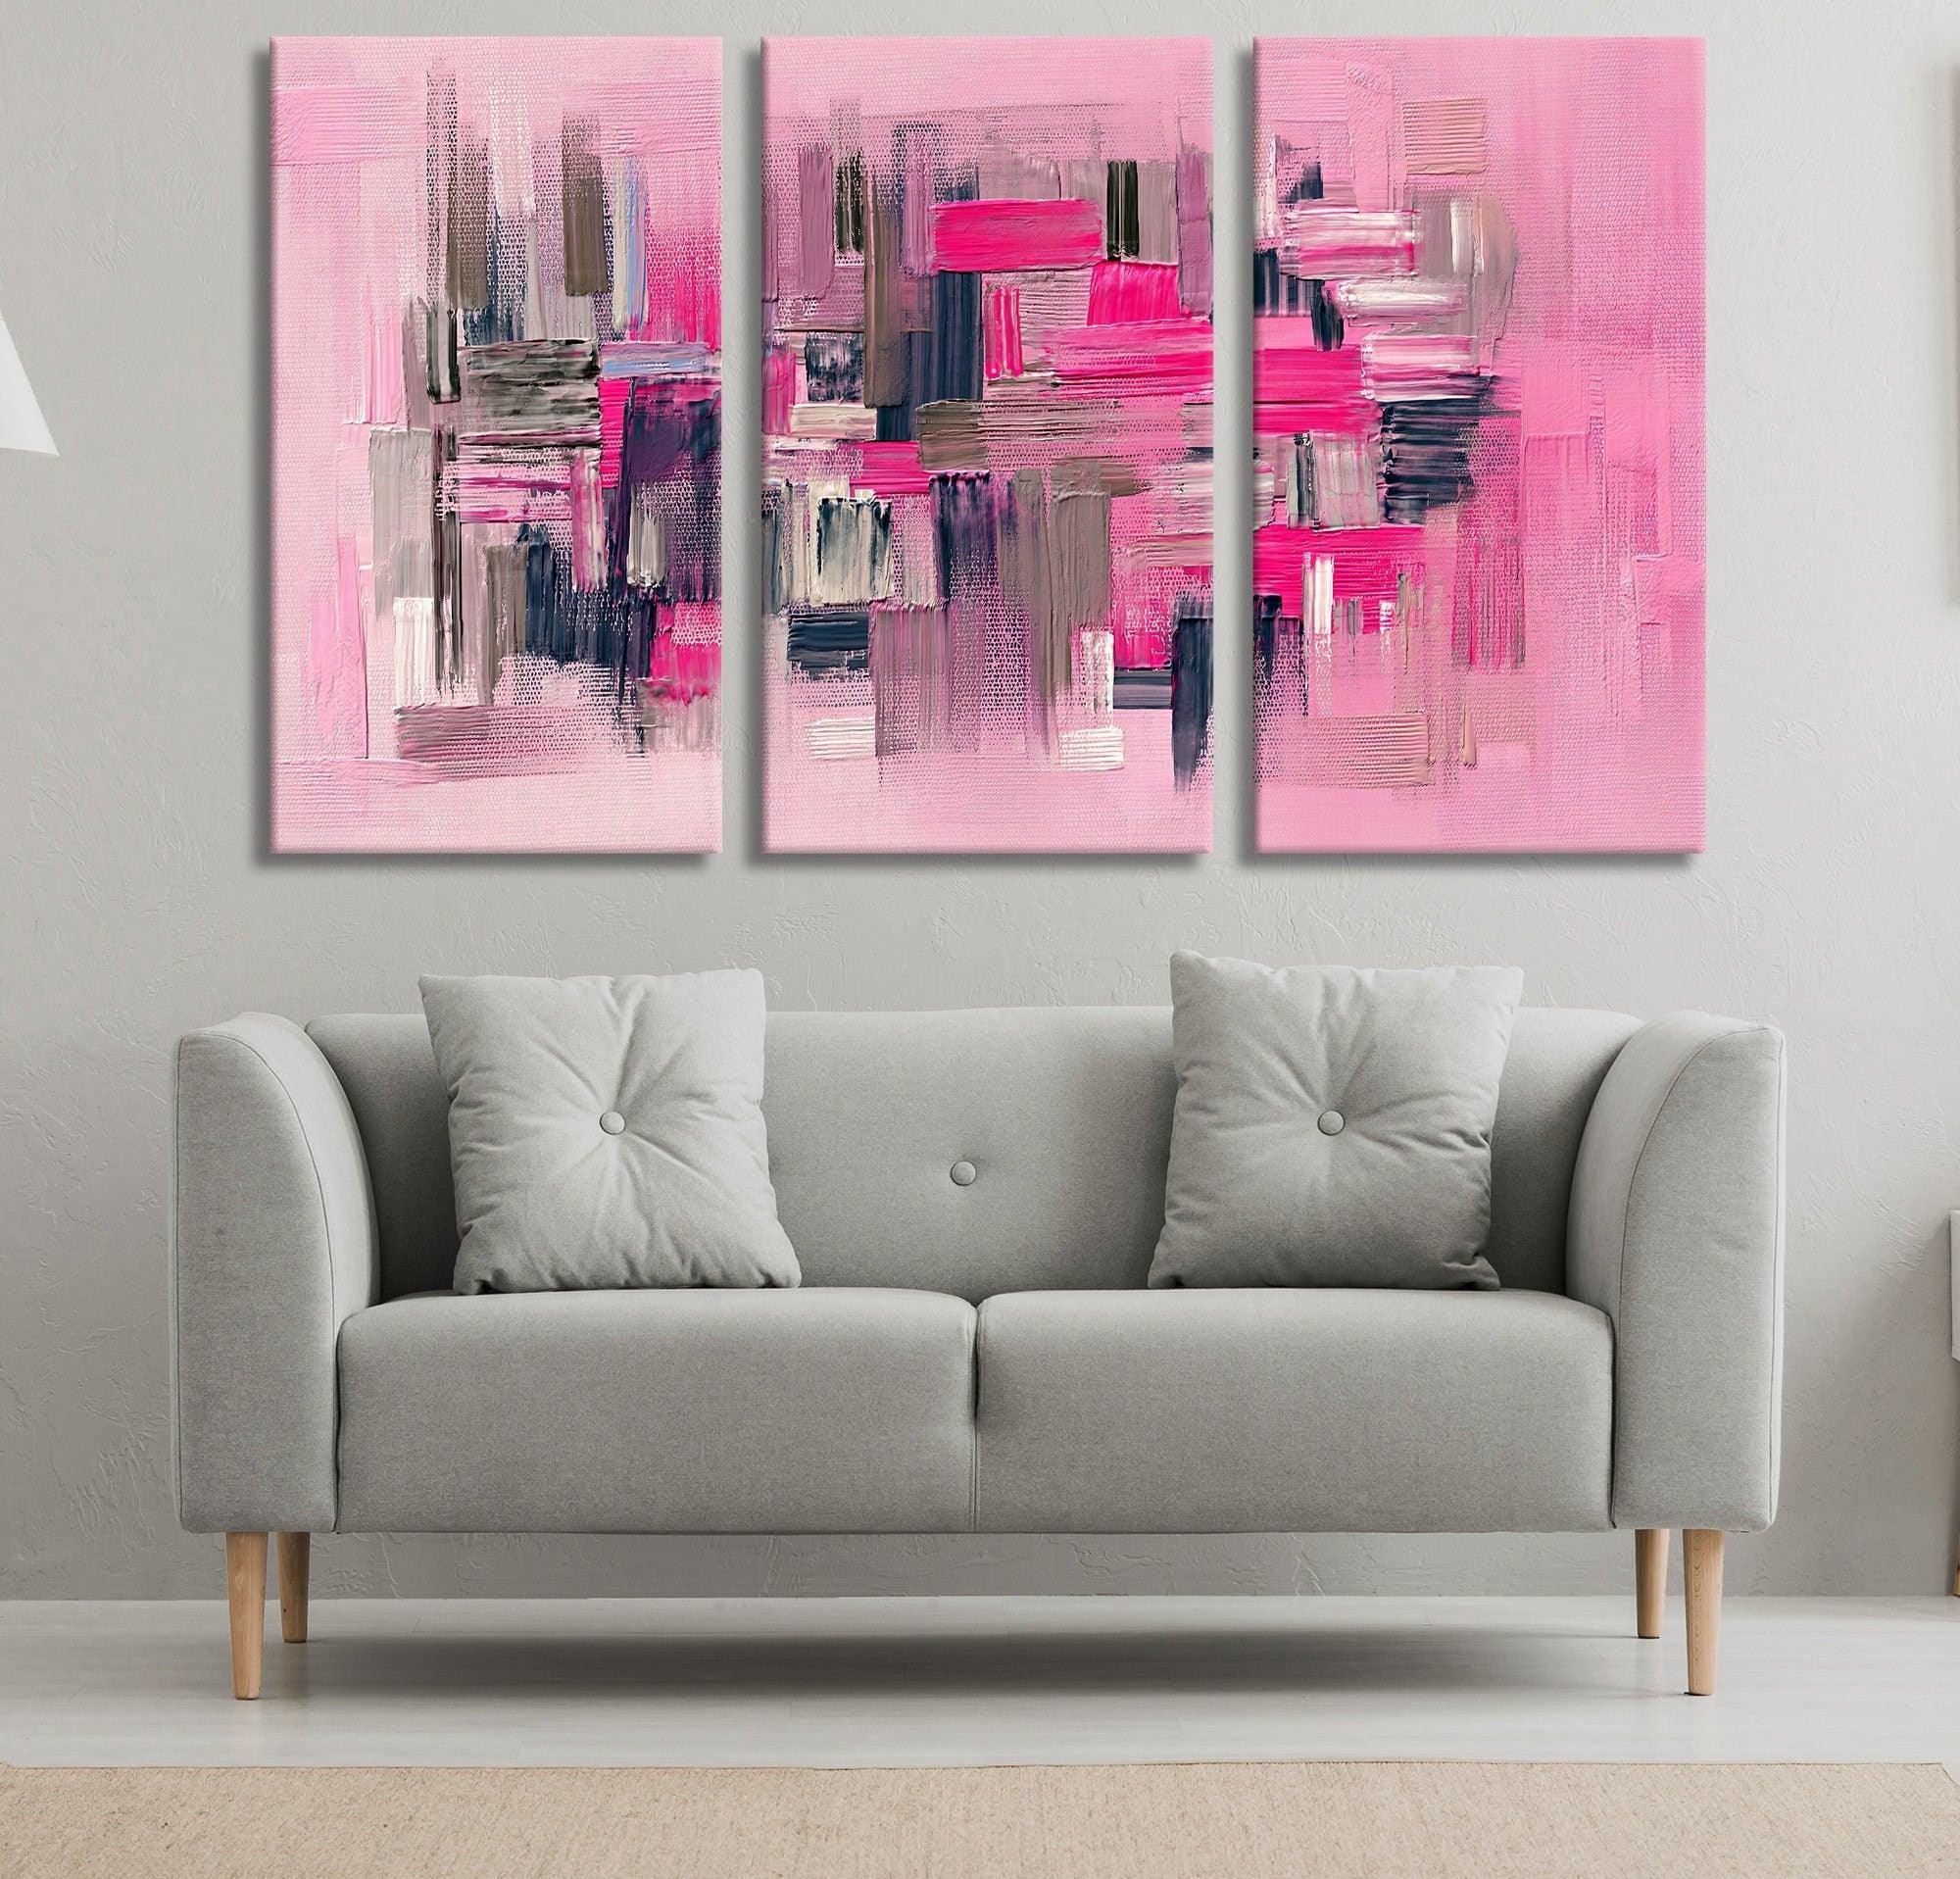 Abstract pink Textured glass wall art |Oil Painting on Canvas, pink Large Original Custom Modern Painting Living Room Wall Art, pink art